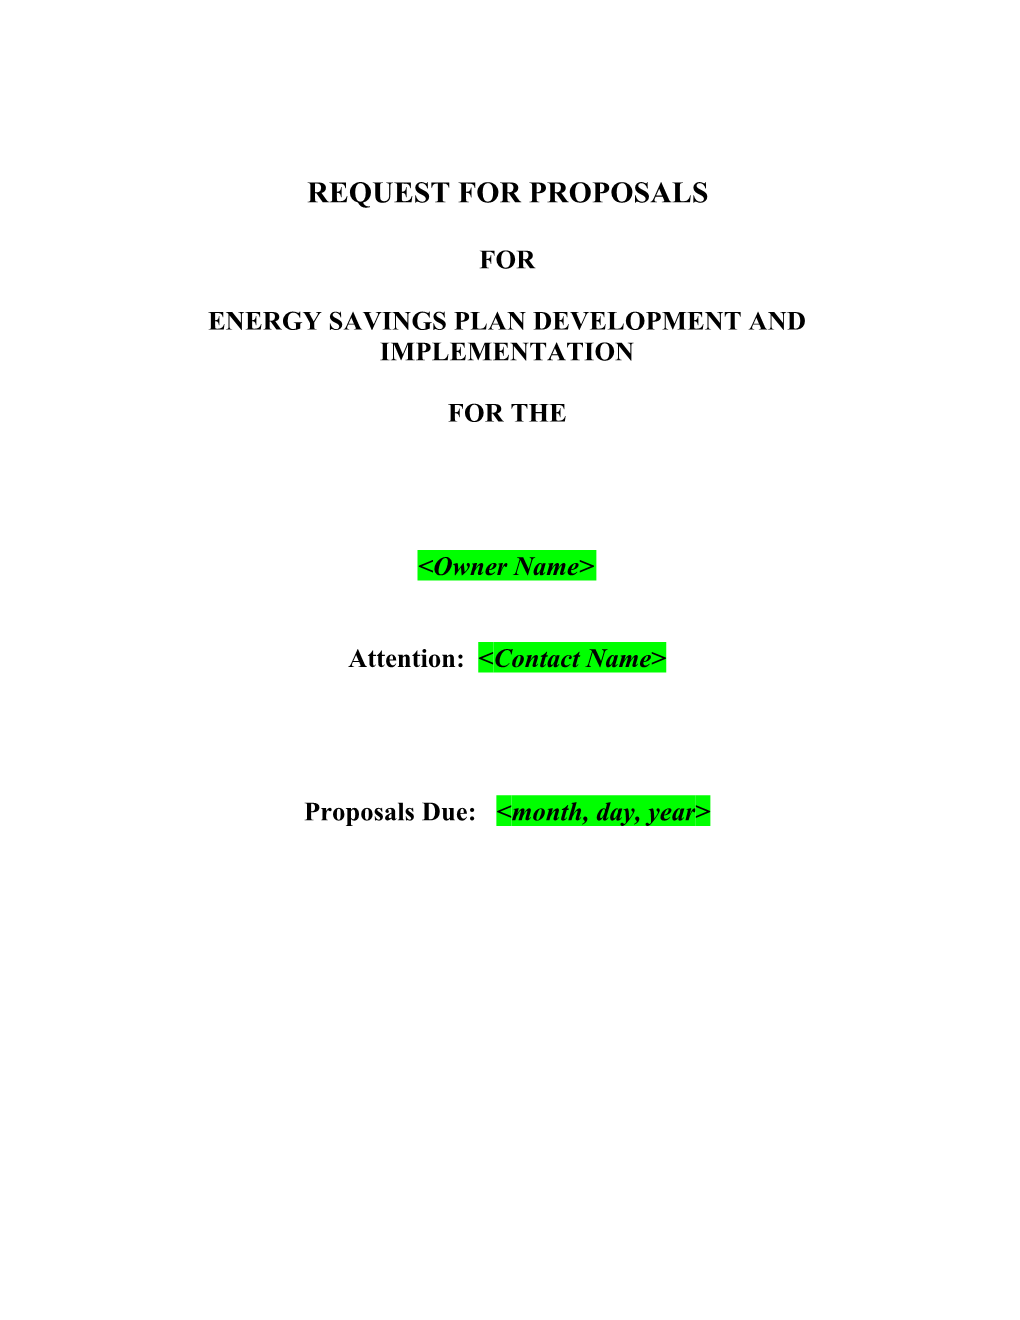 EISP RFP from the DCA May 2011 (00536034)